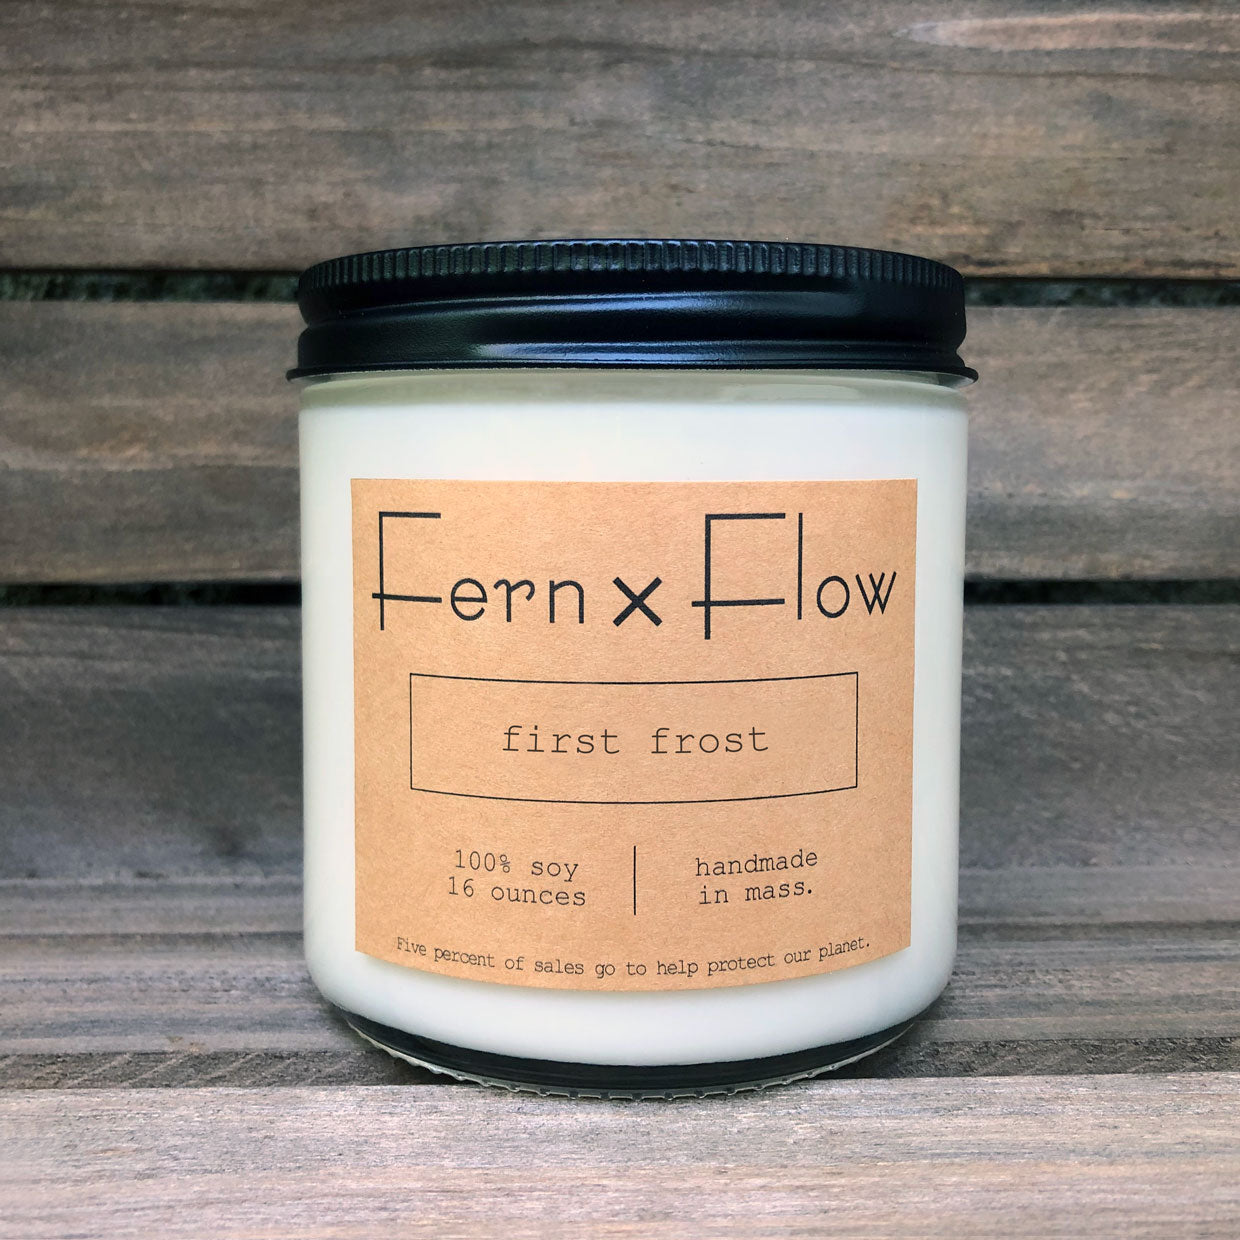 Sixteen-ounce Fern x Flow First Frost scented soy candle against a weathered, wooden crate.